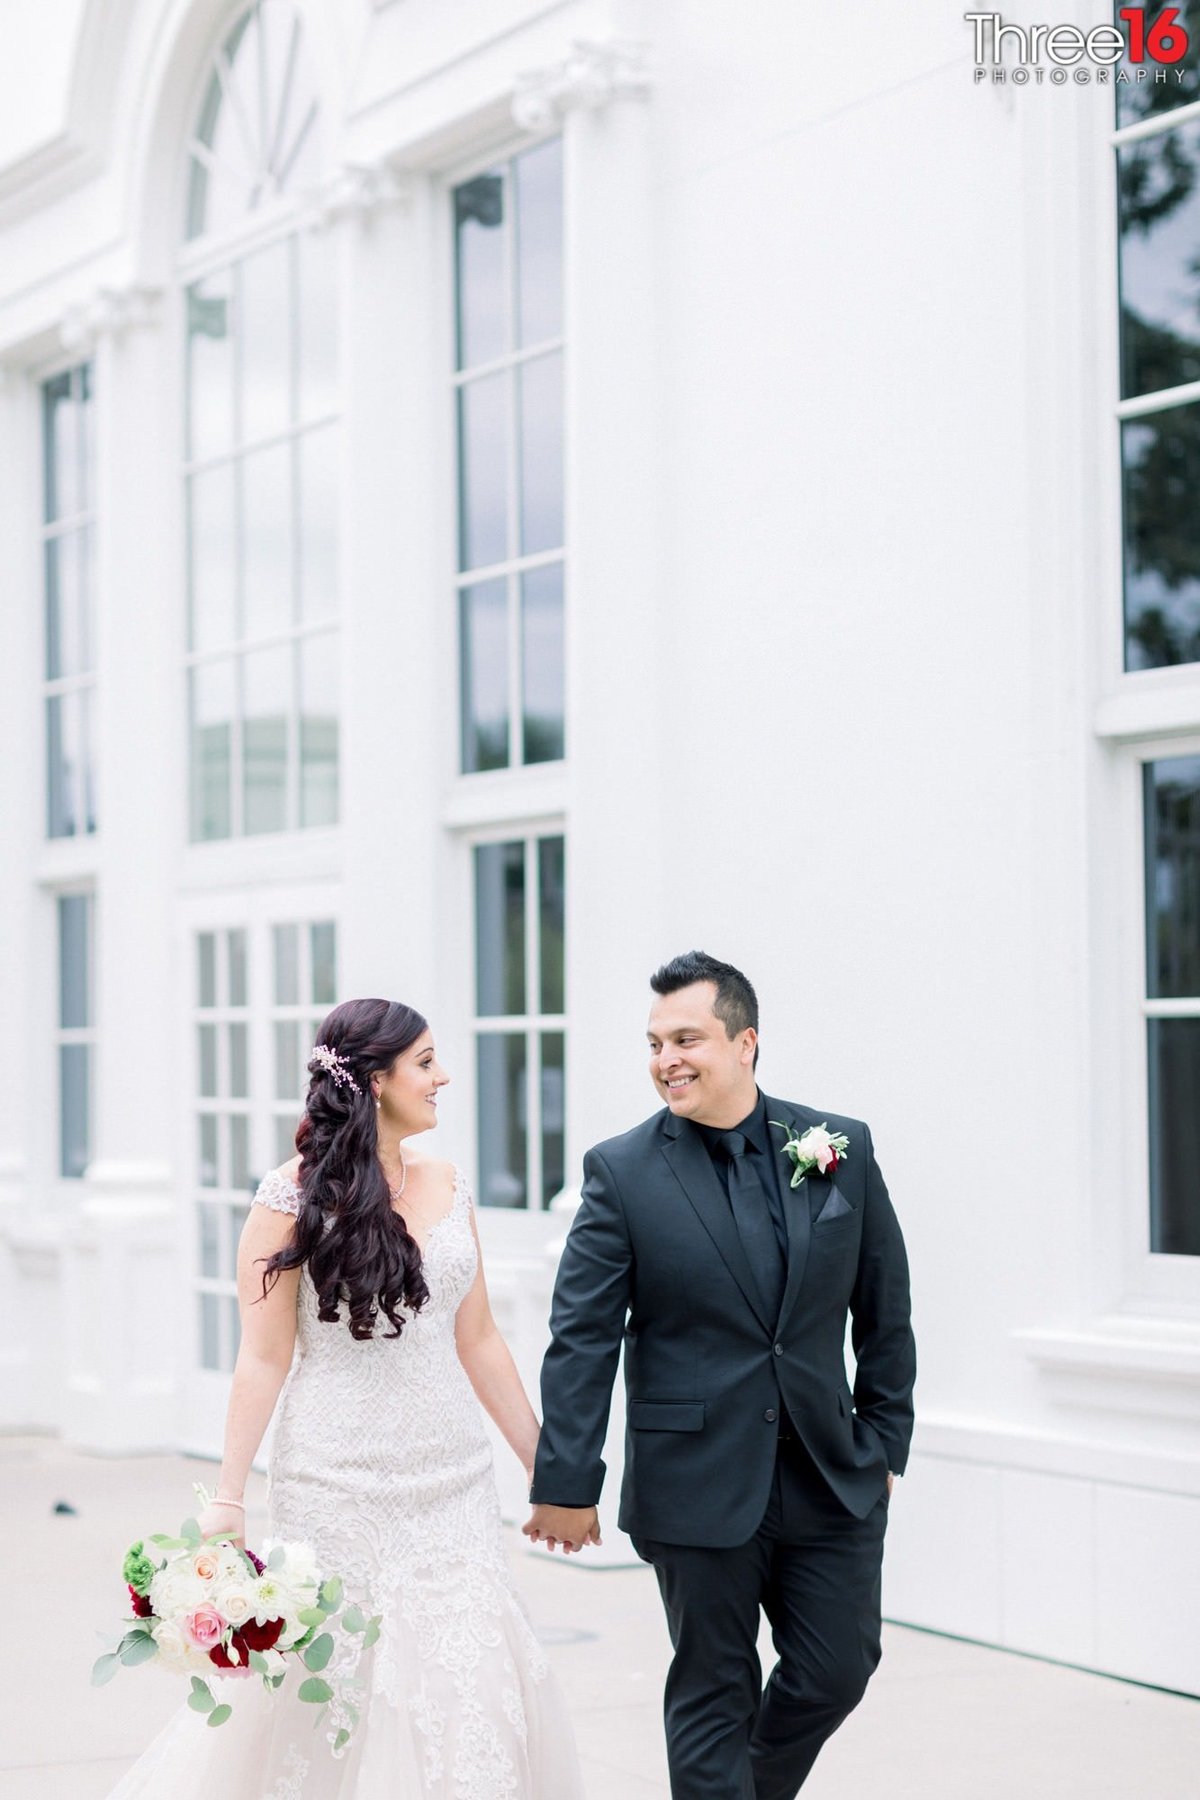 Bride and Groom smile at each other while holding hands